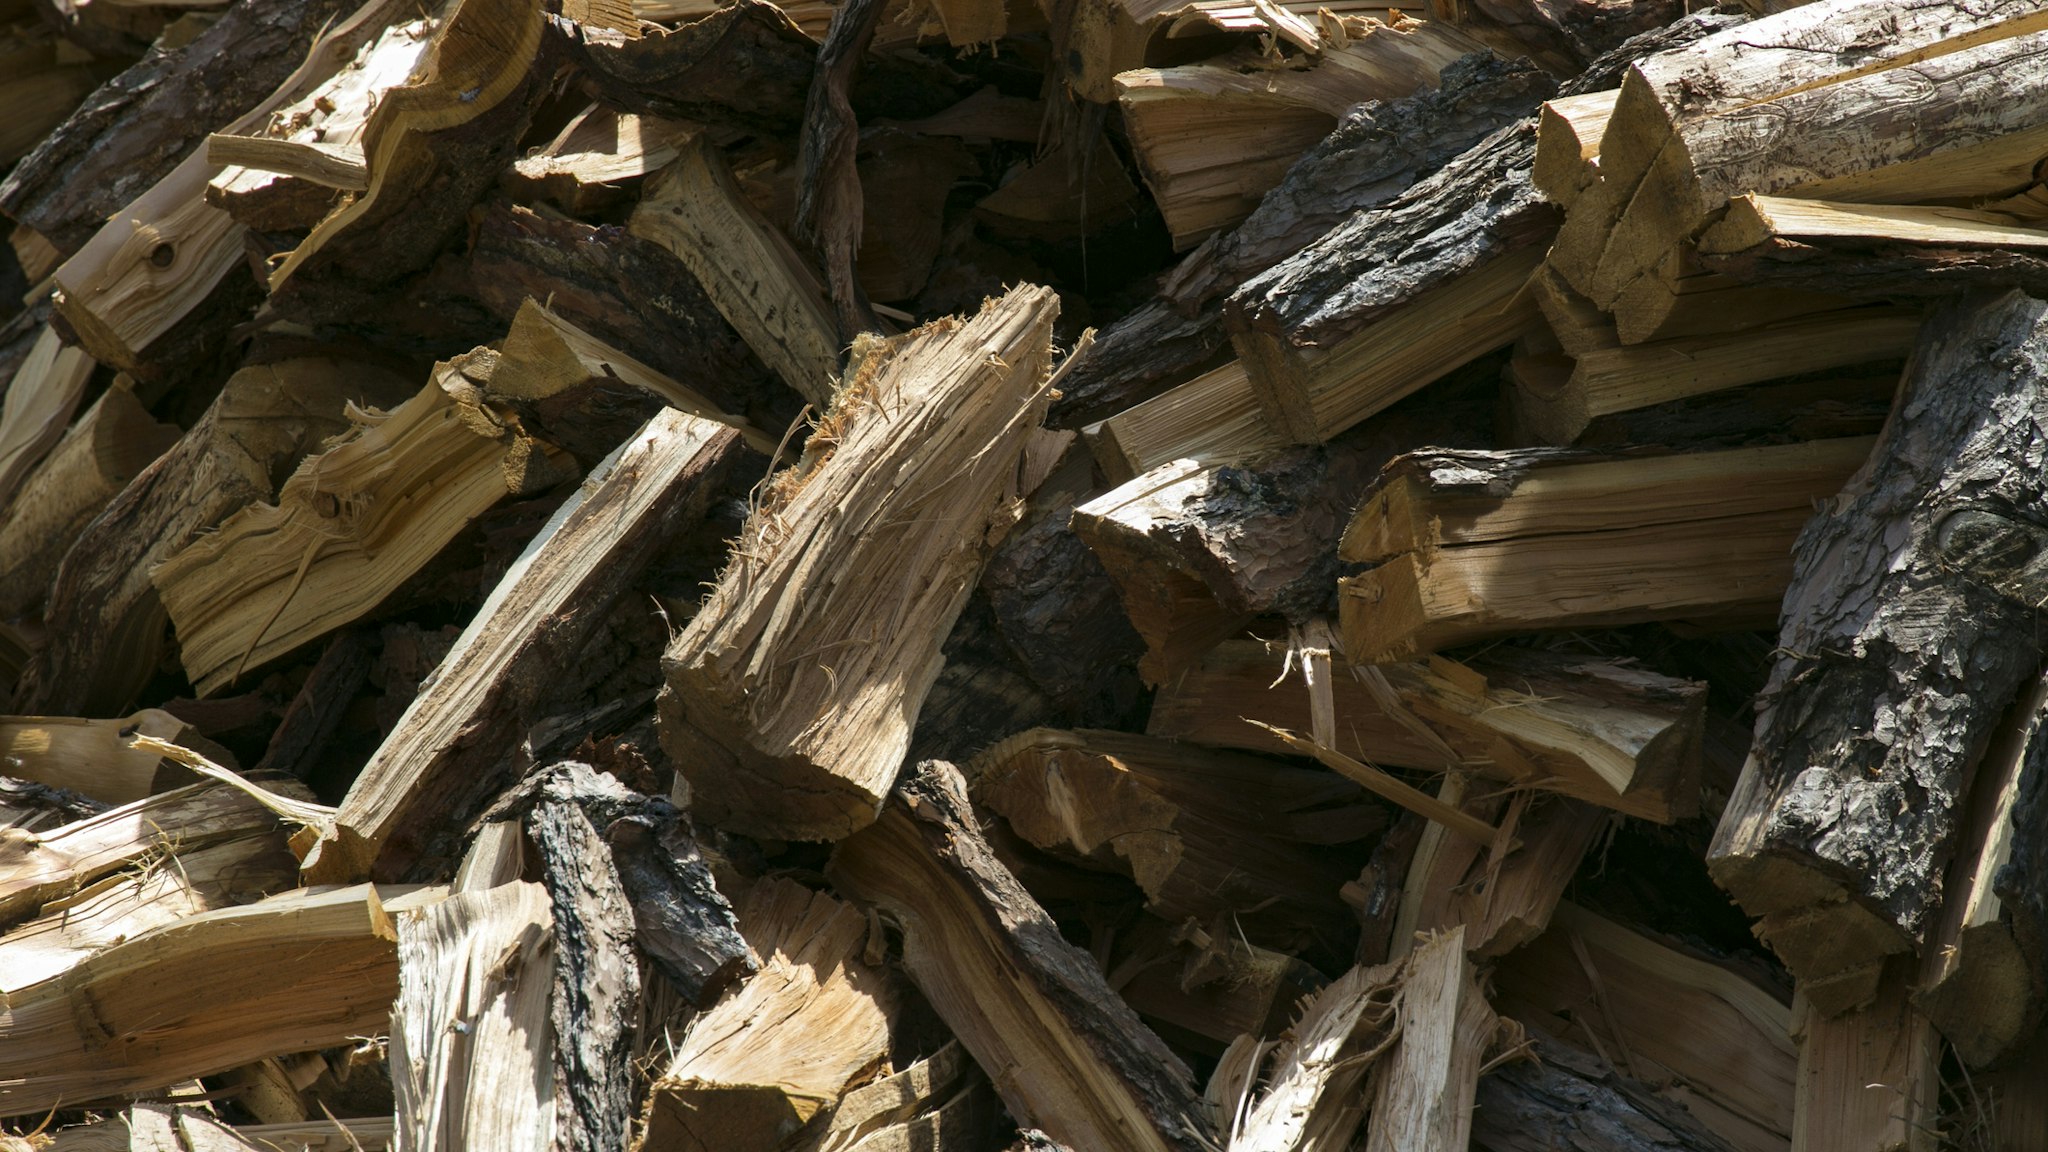 Group of Logs in woodstore - stock photo